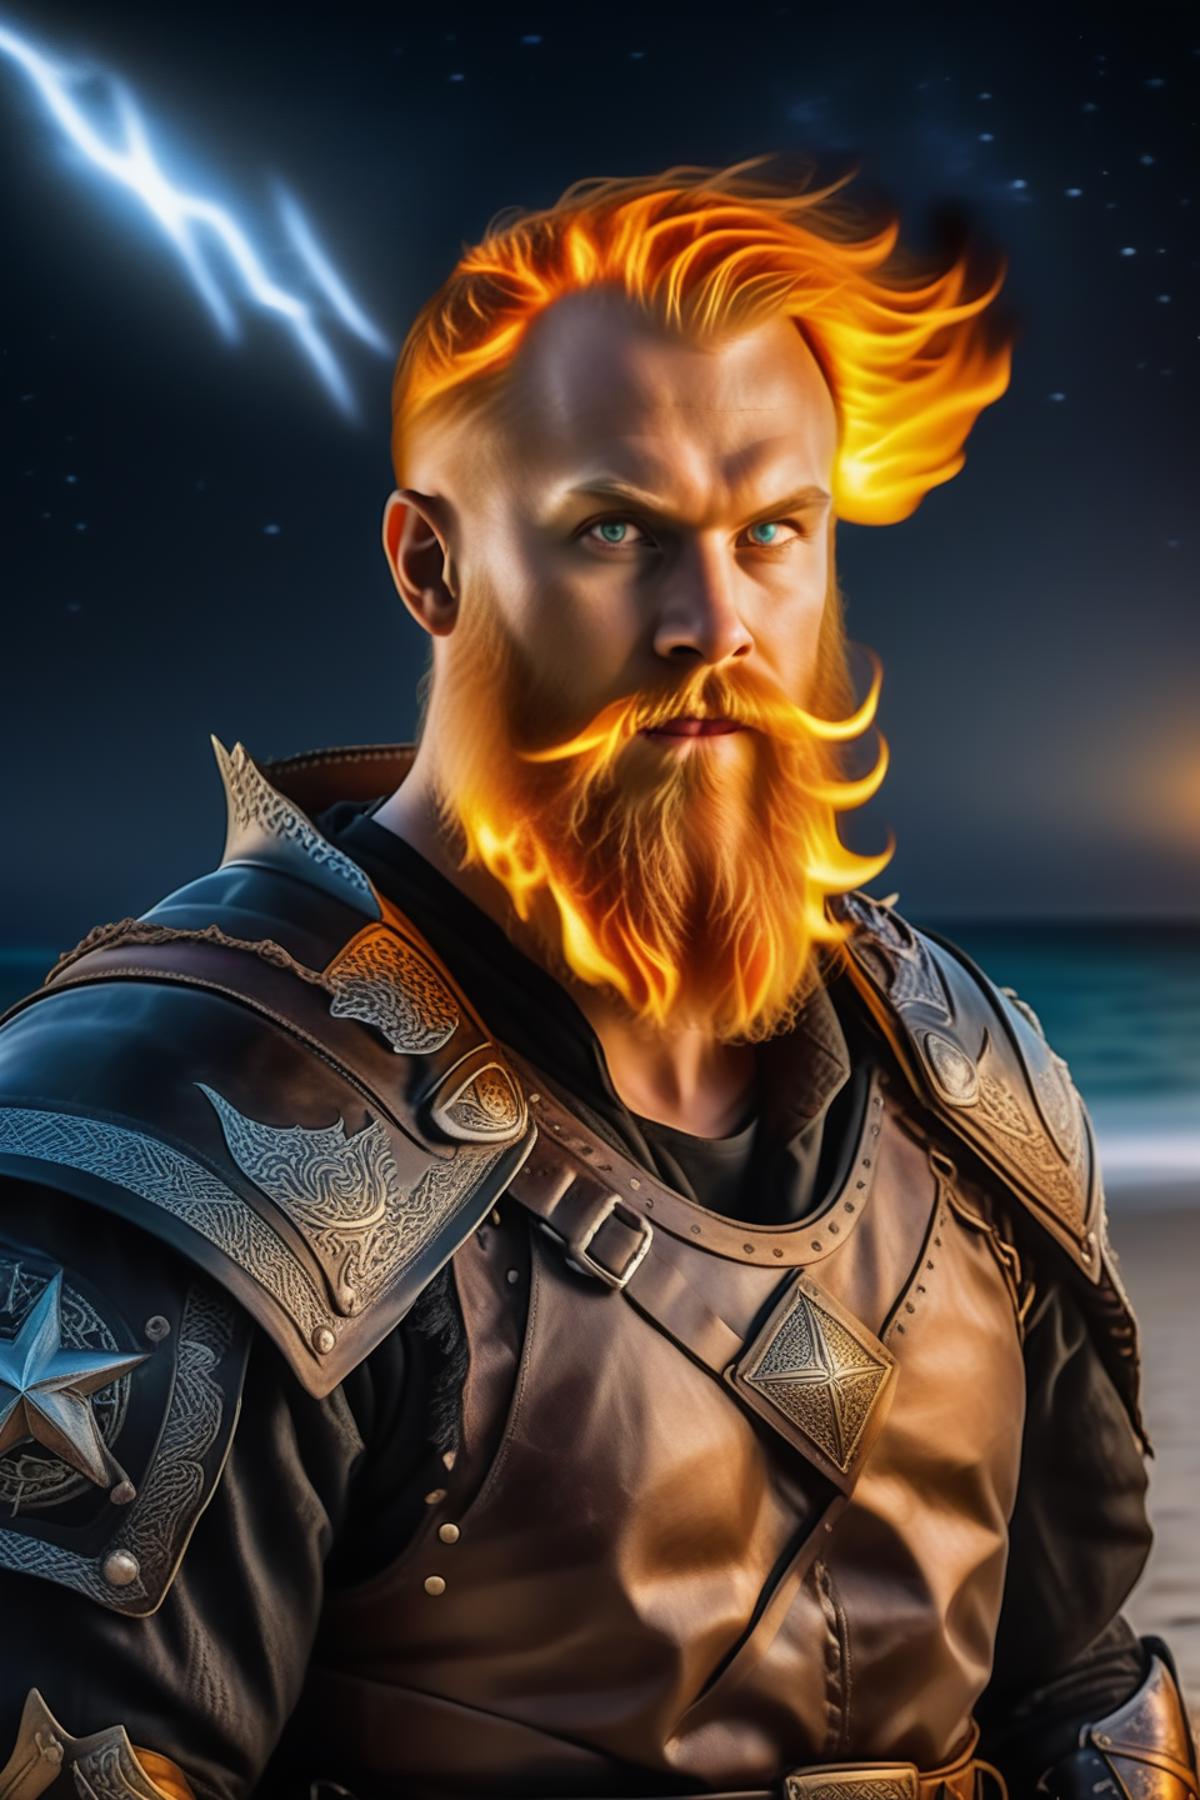 Fire hair - Hair in flames image by Catalorian